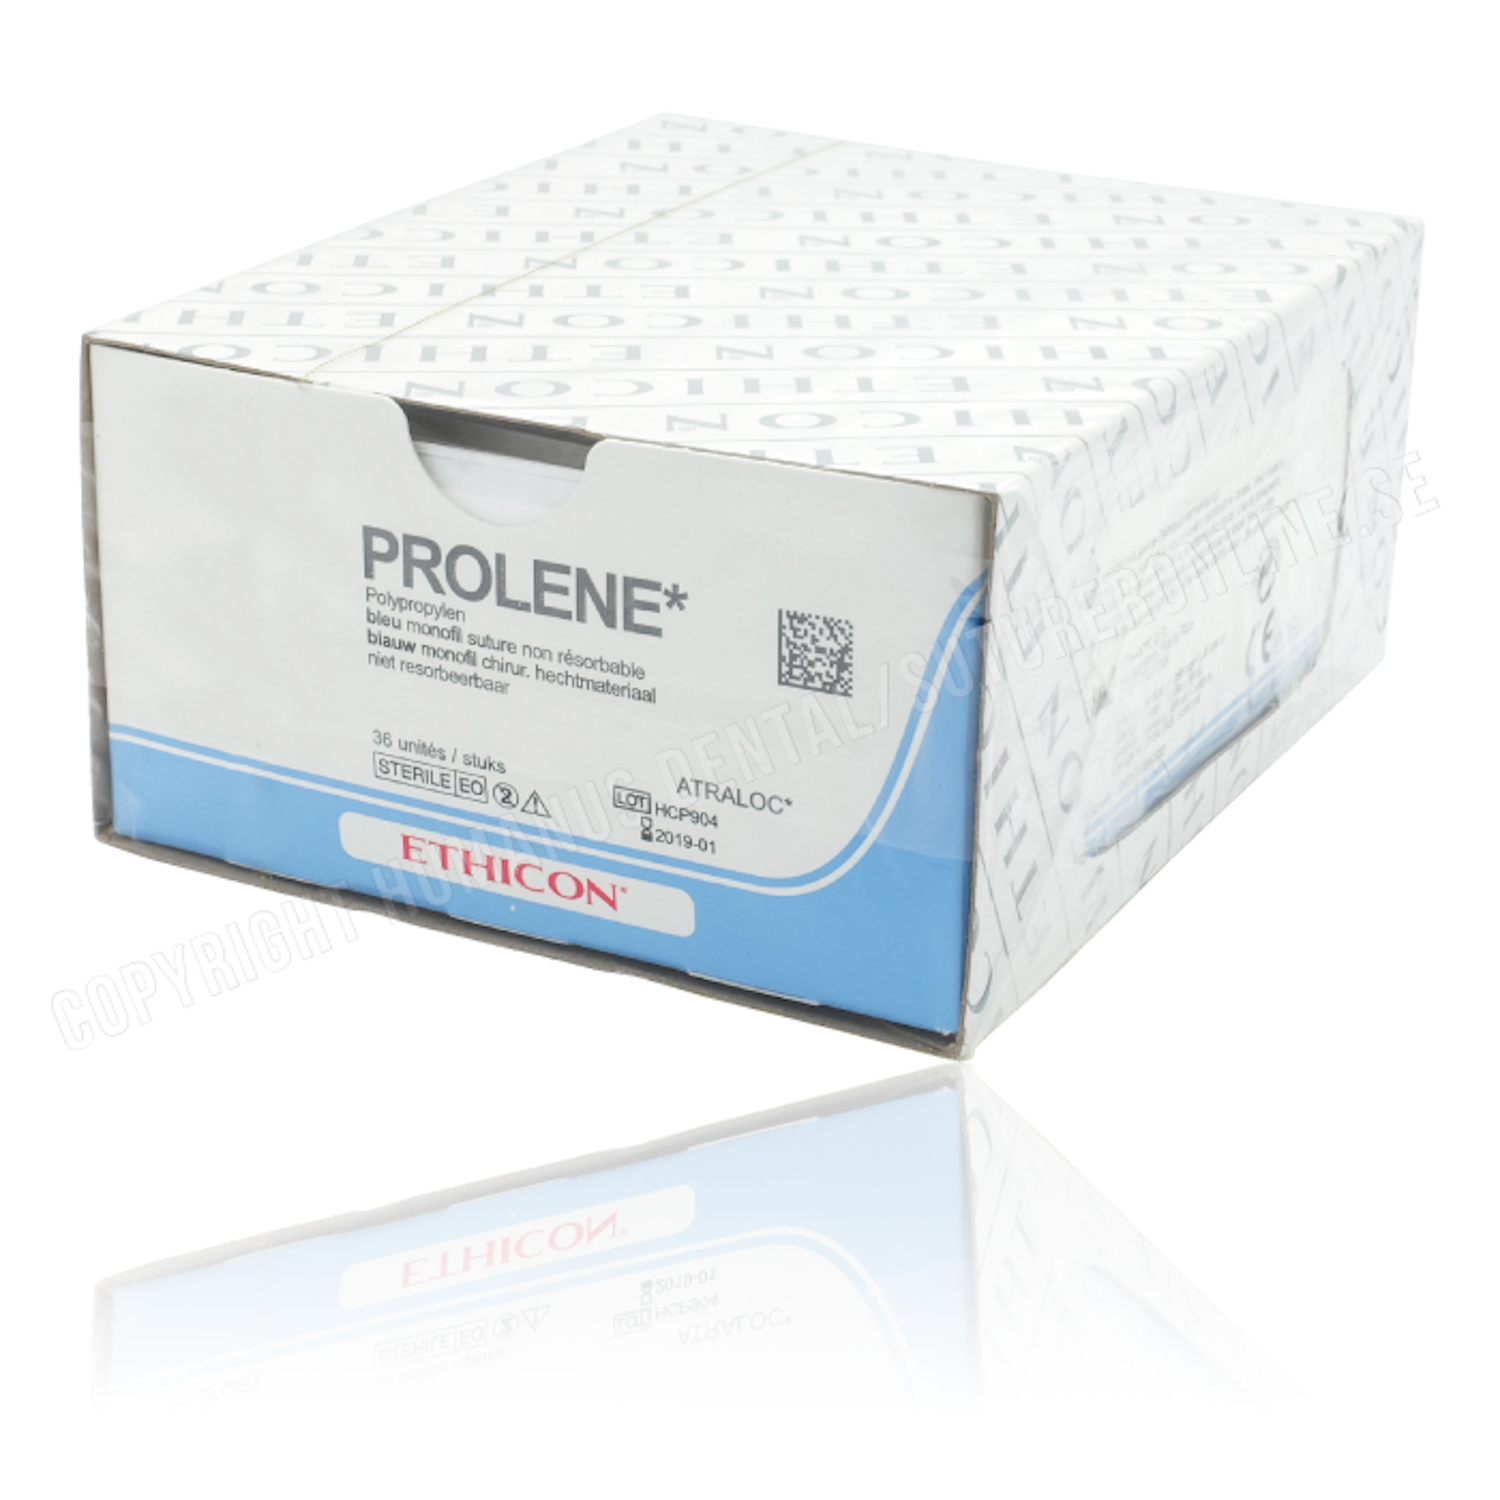 Ethicon Prolene Suture | Non Absorbable | Blue | Size: 5-0 | Length: 45cm | Needle: PC-3 Prime | Pack of 36 (1)